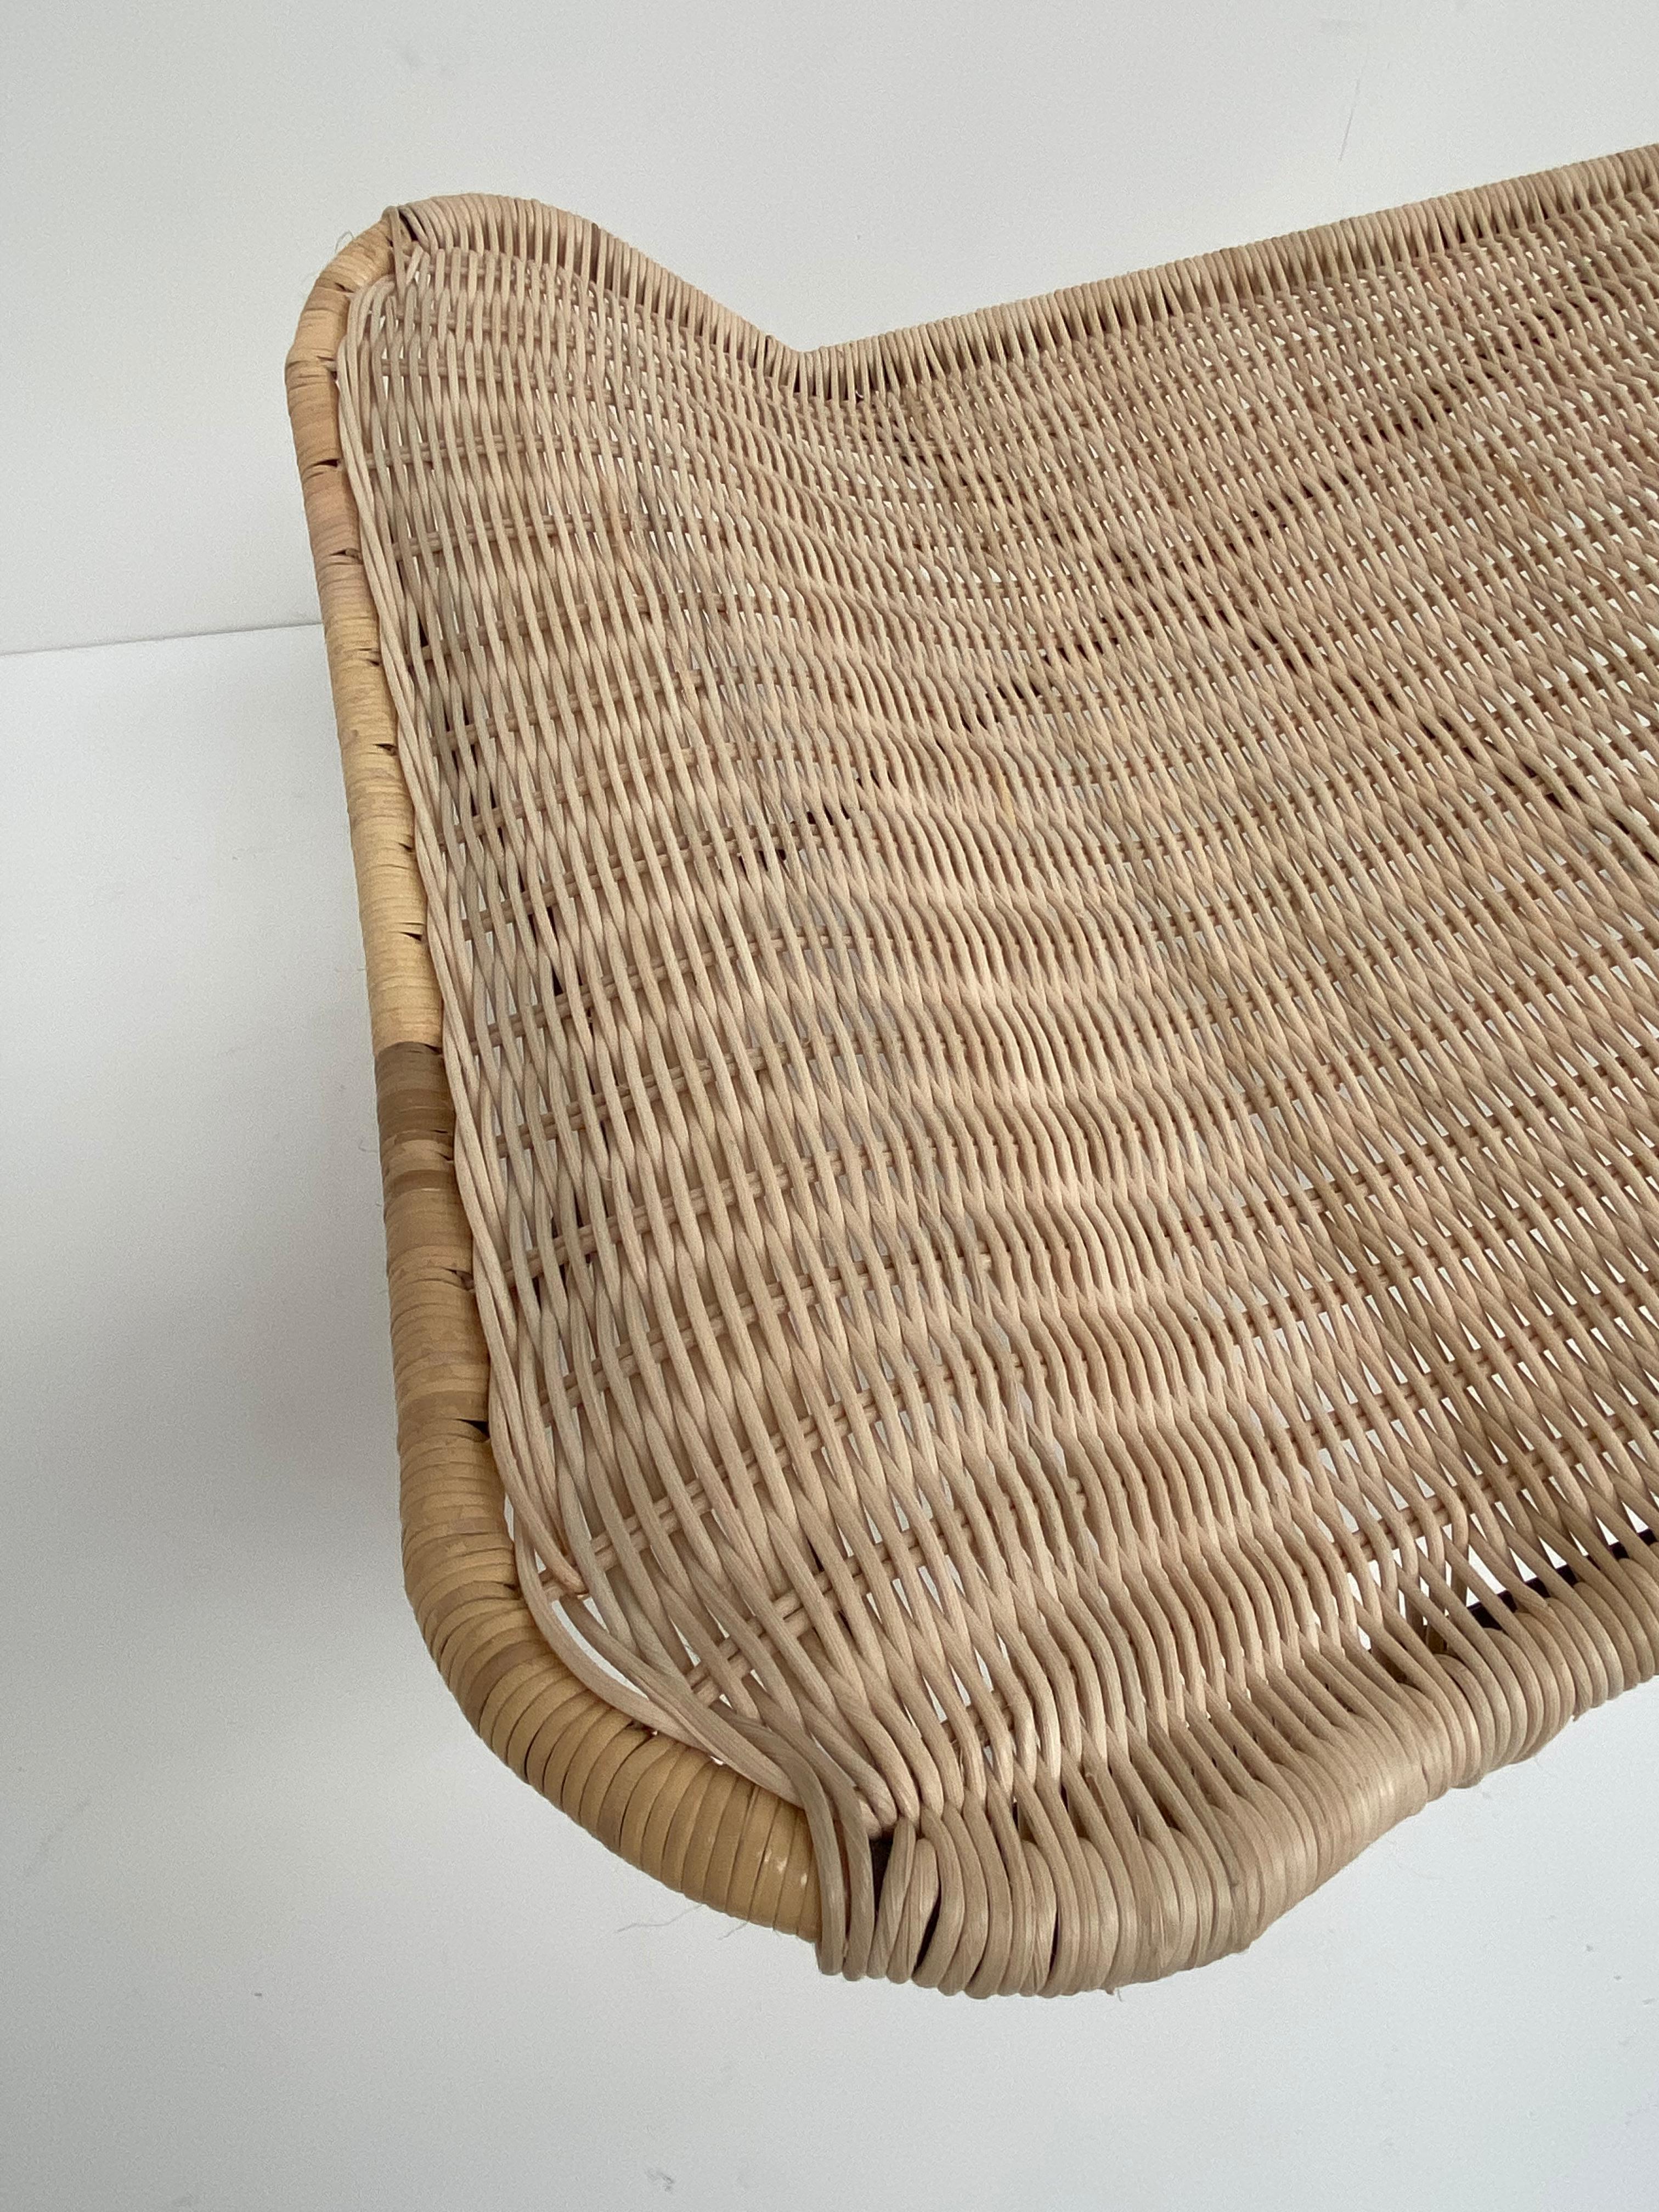 Stunning Sculptural Form Wicker Chaise Attributed to Raoul Guys, France, 1950's For Sale 1